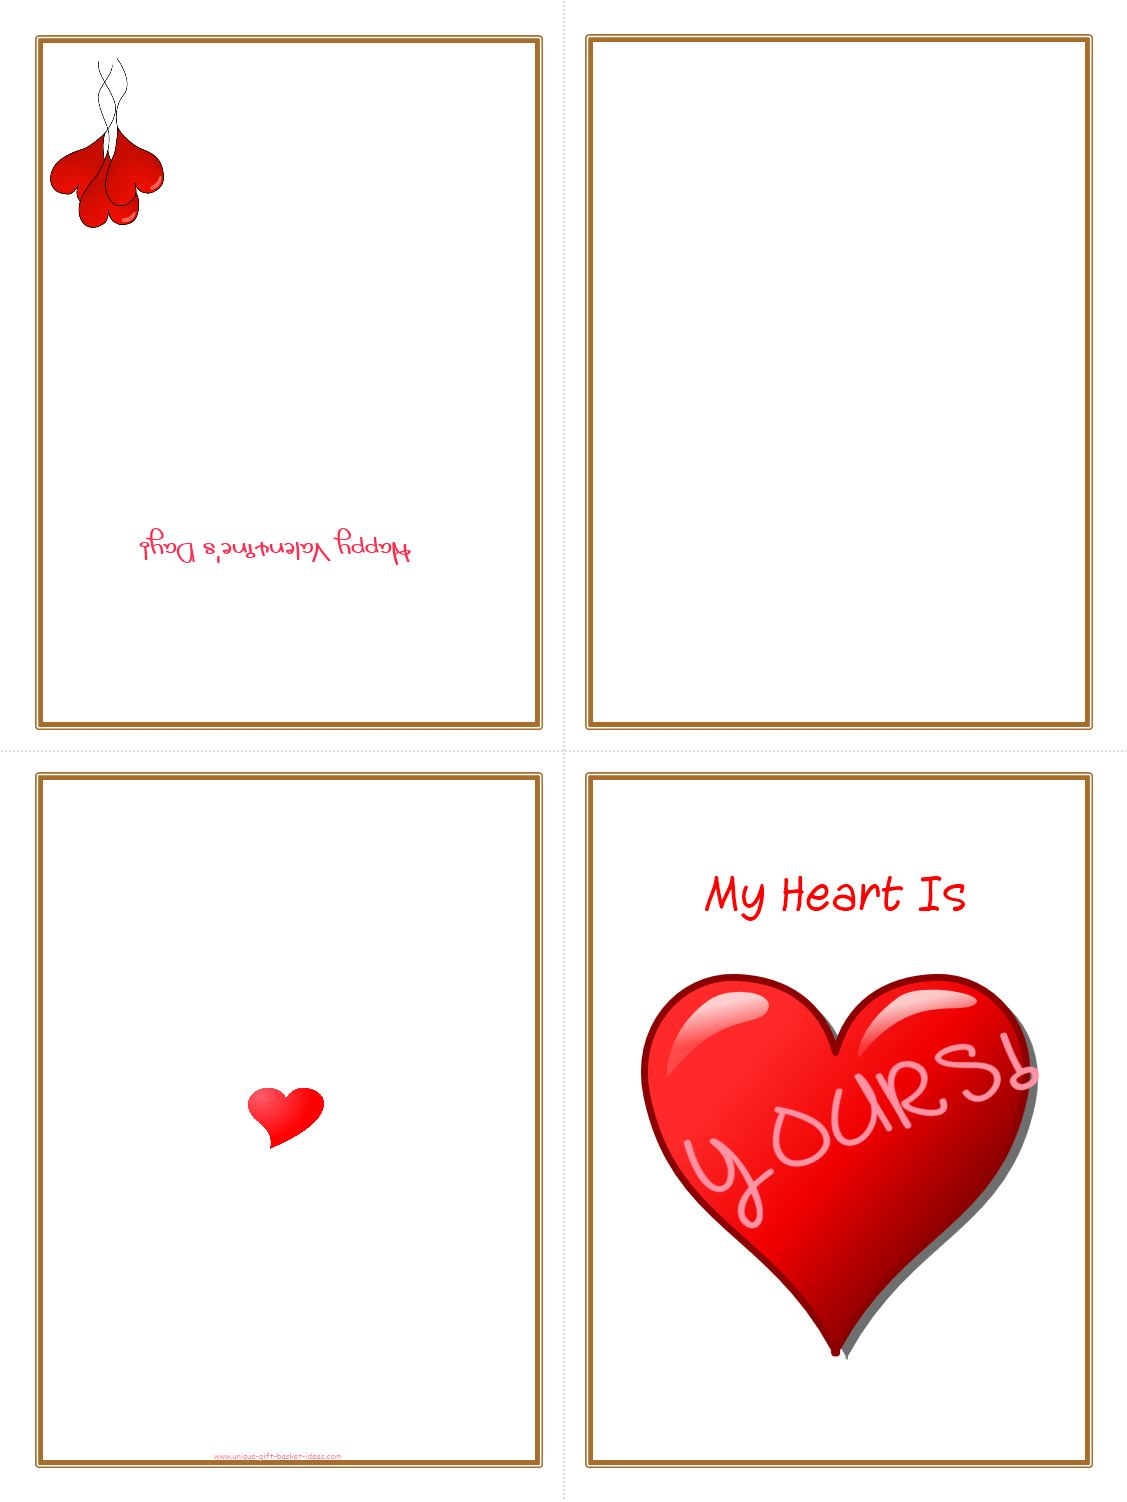 8 Best Images of Free Printable Fold Valentine Cards Free Printable